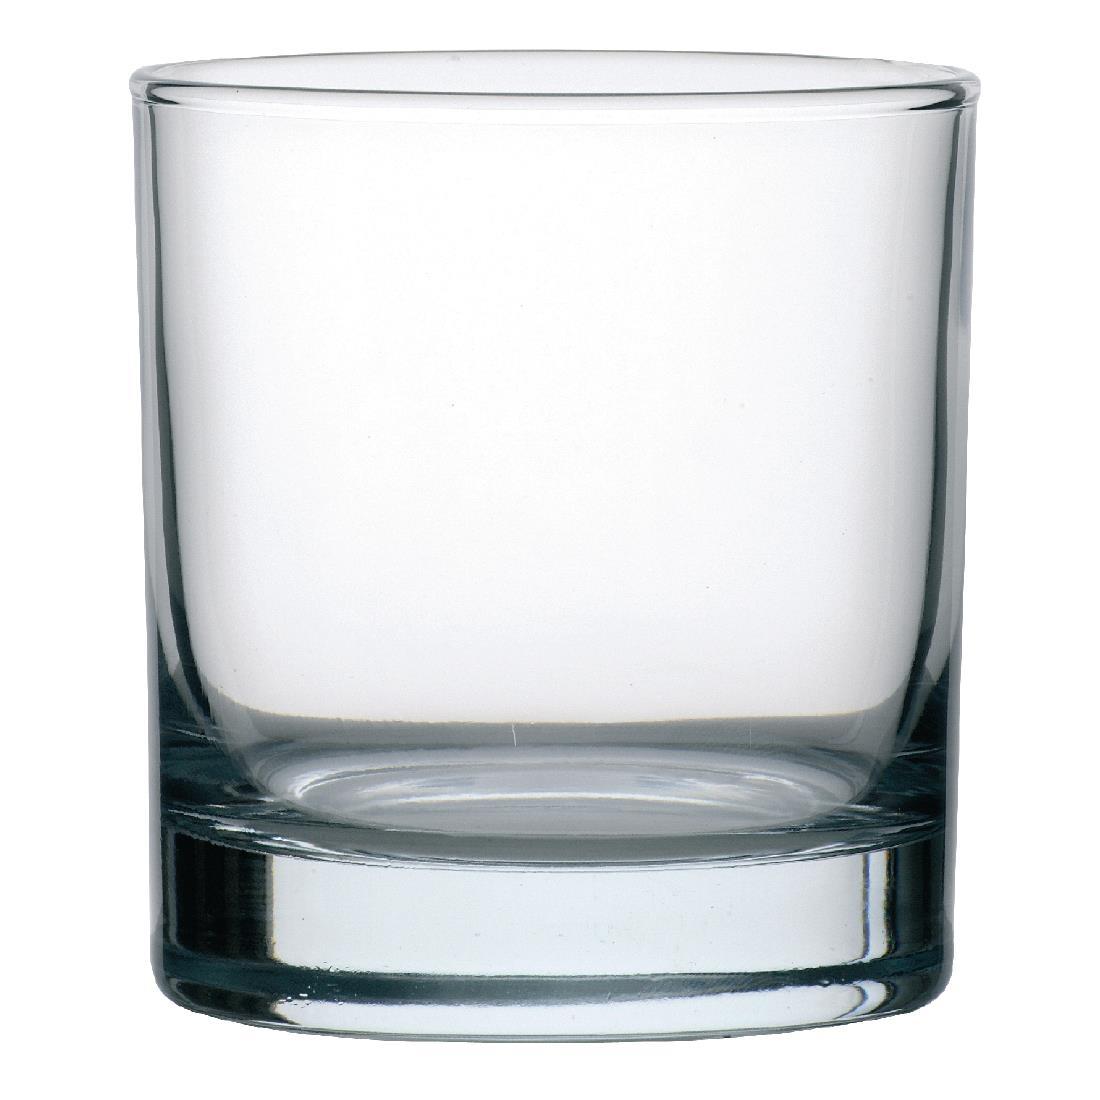 Utopia Old Fashioned Rocks Glasses 330ml (Pack of 12) - F851  - 1